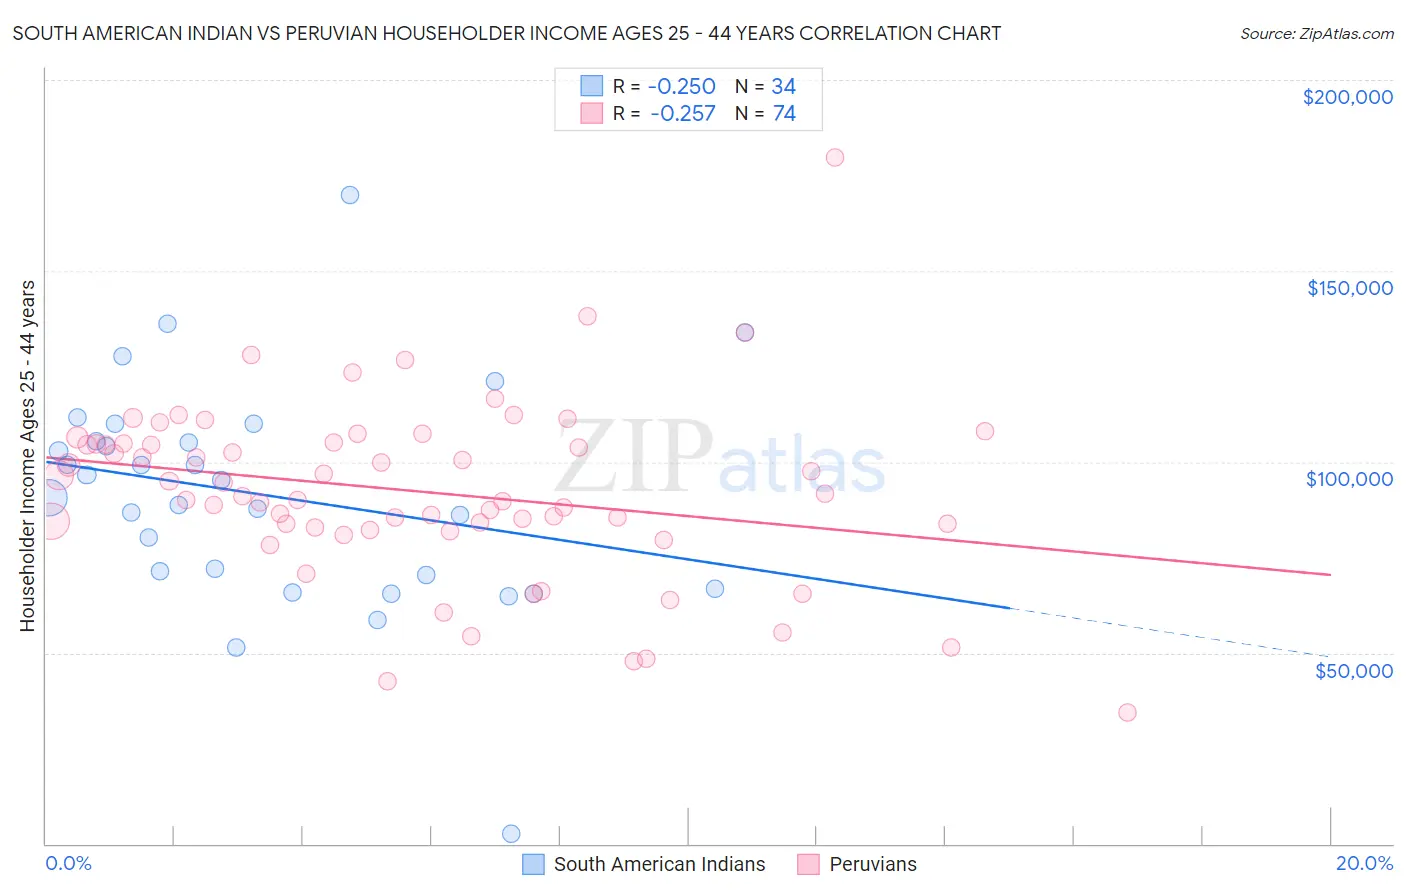 South American Indian vs Peruvian Householder Income Ages 25 - 44 years